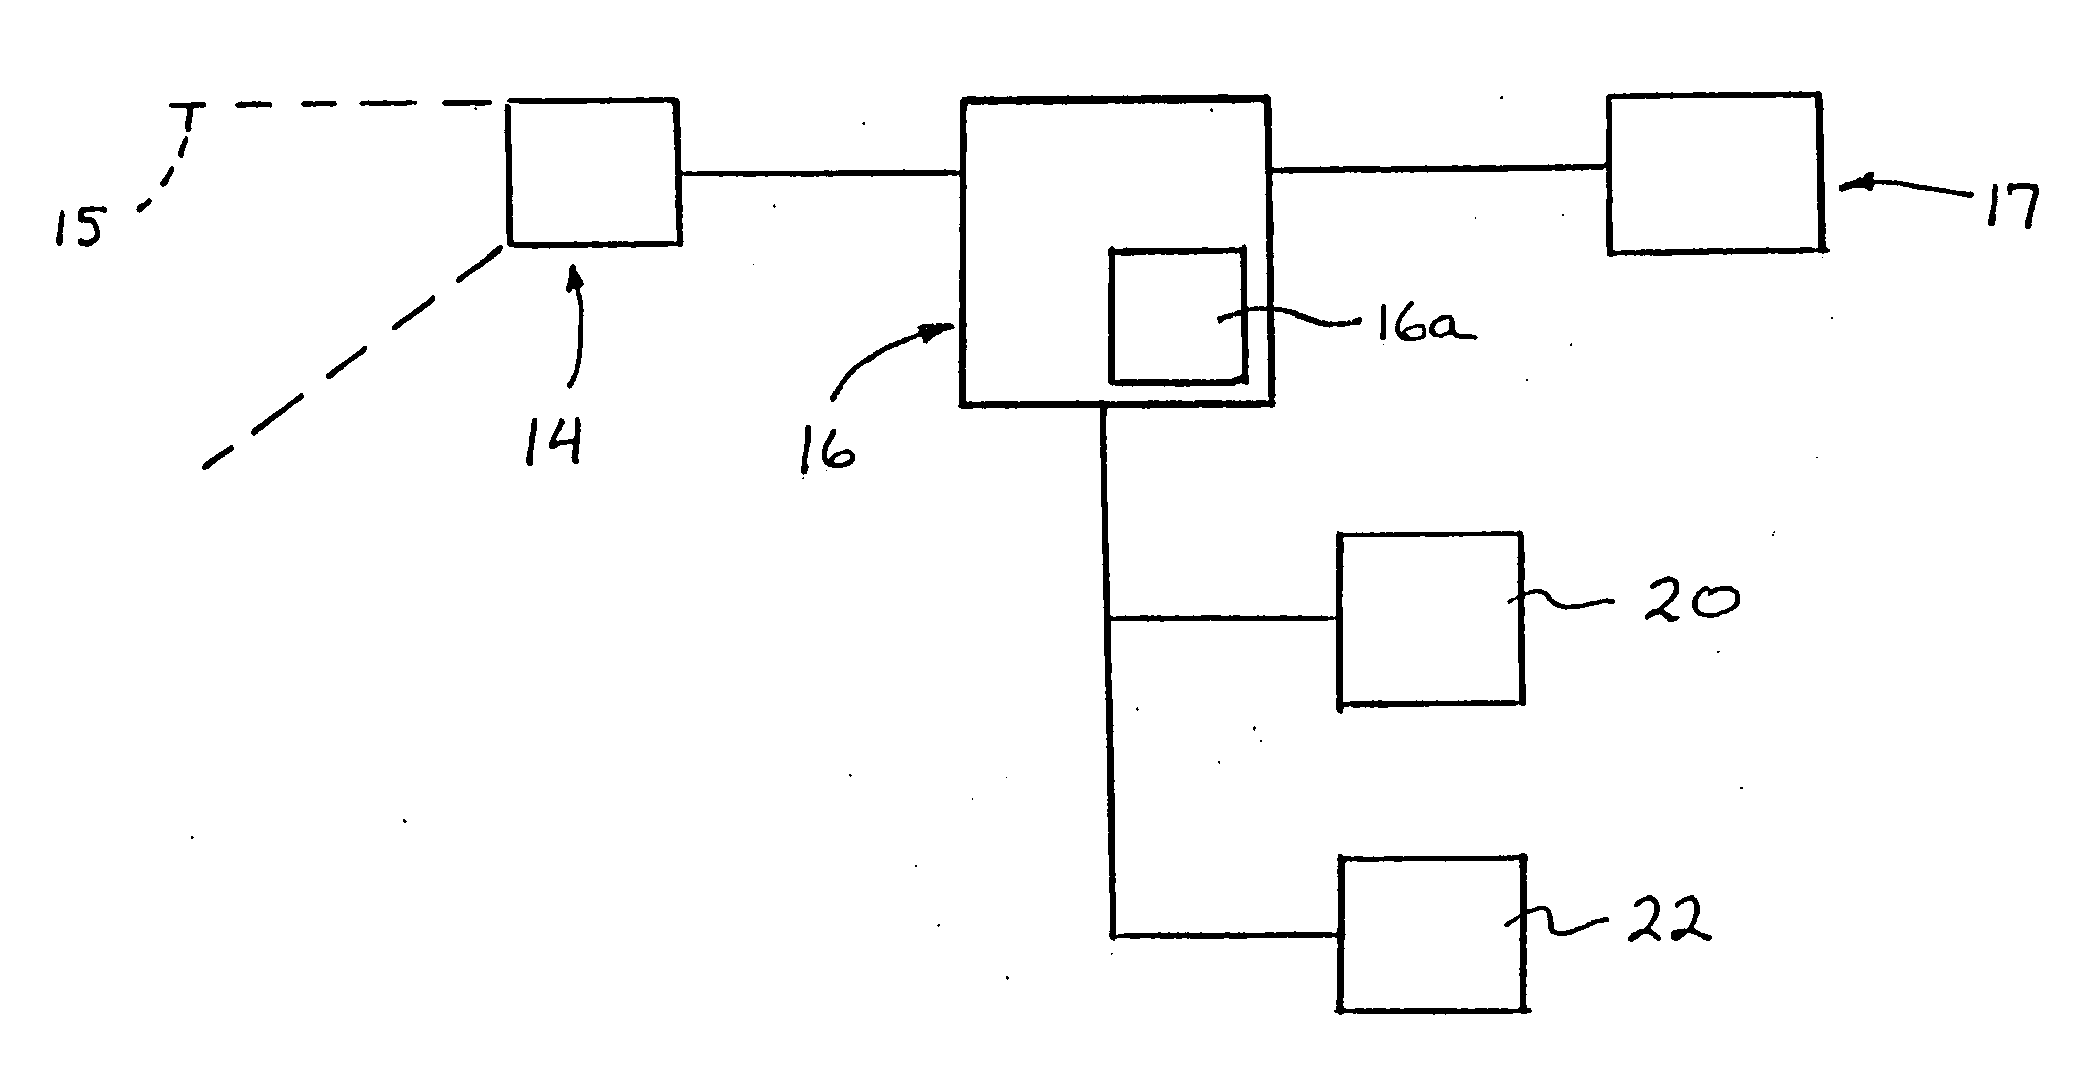 Object detection system for vehicle